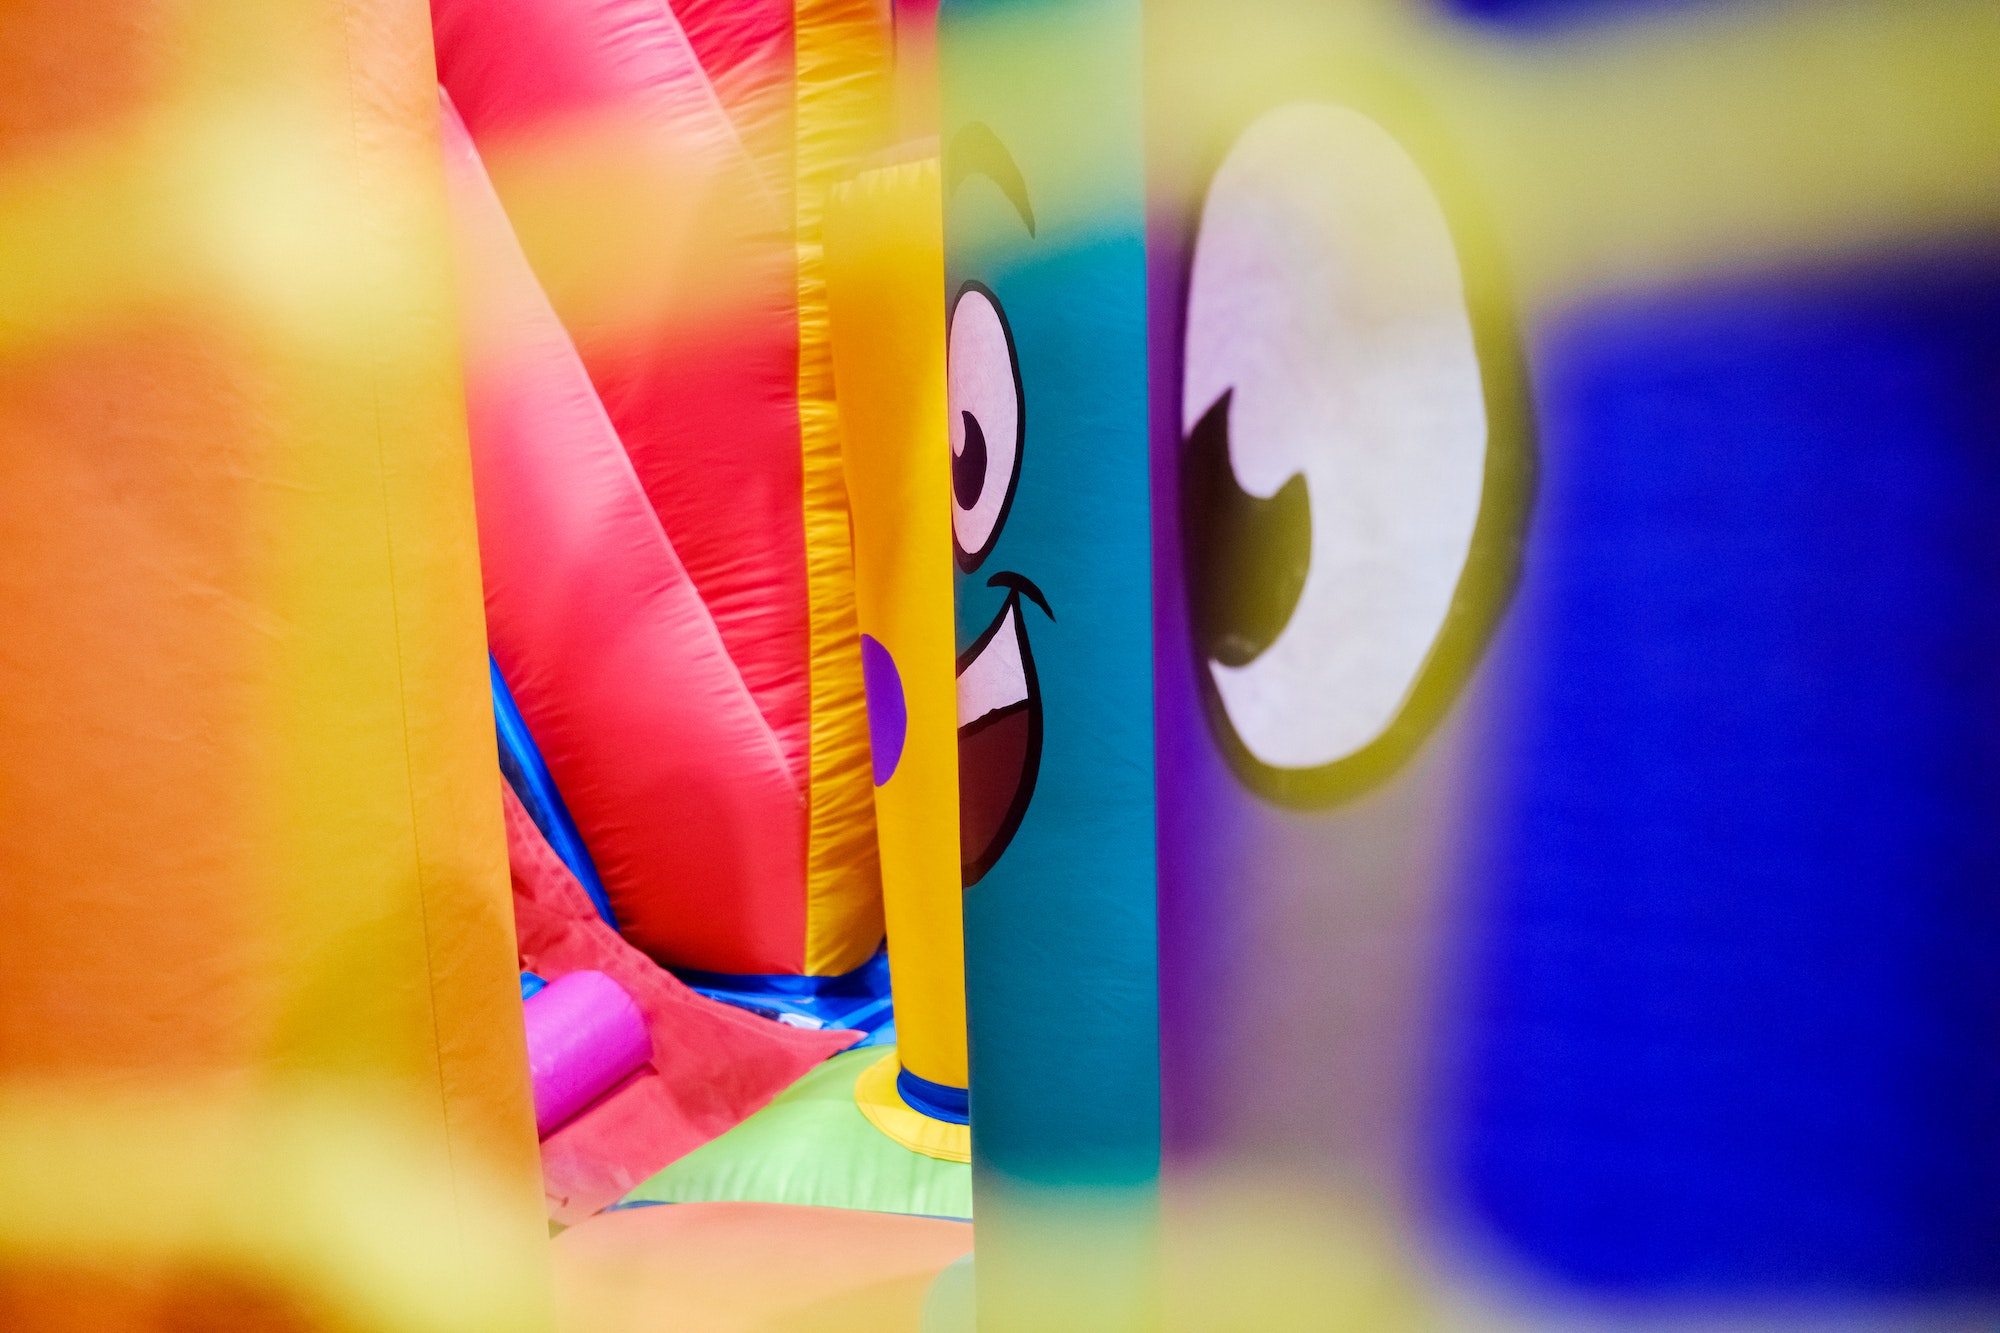 Detail of an inflatable castle to bounce.